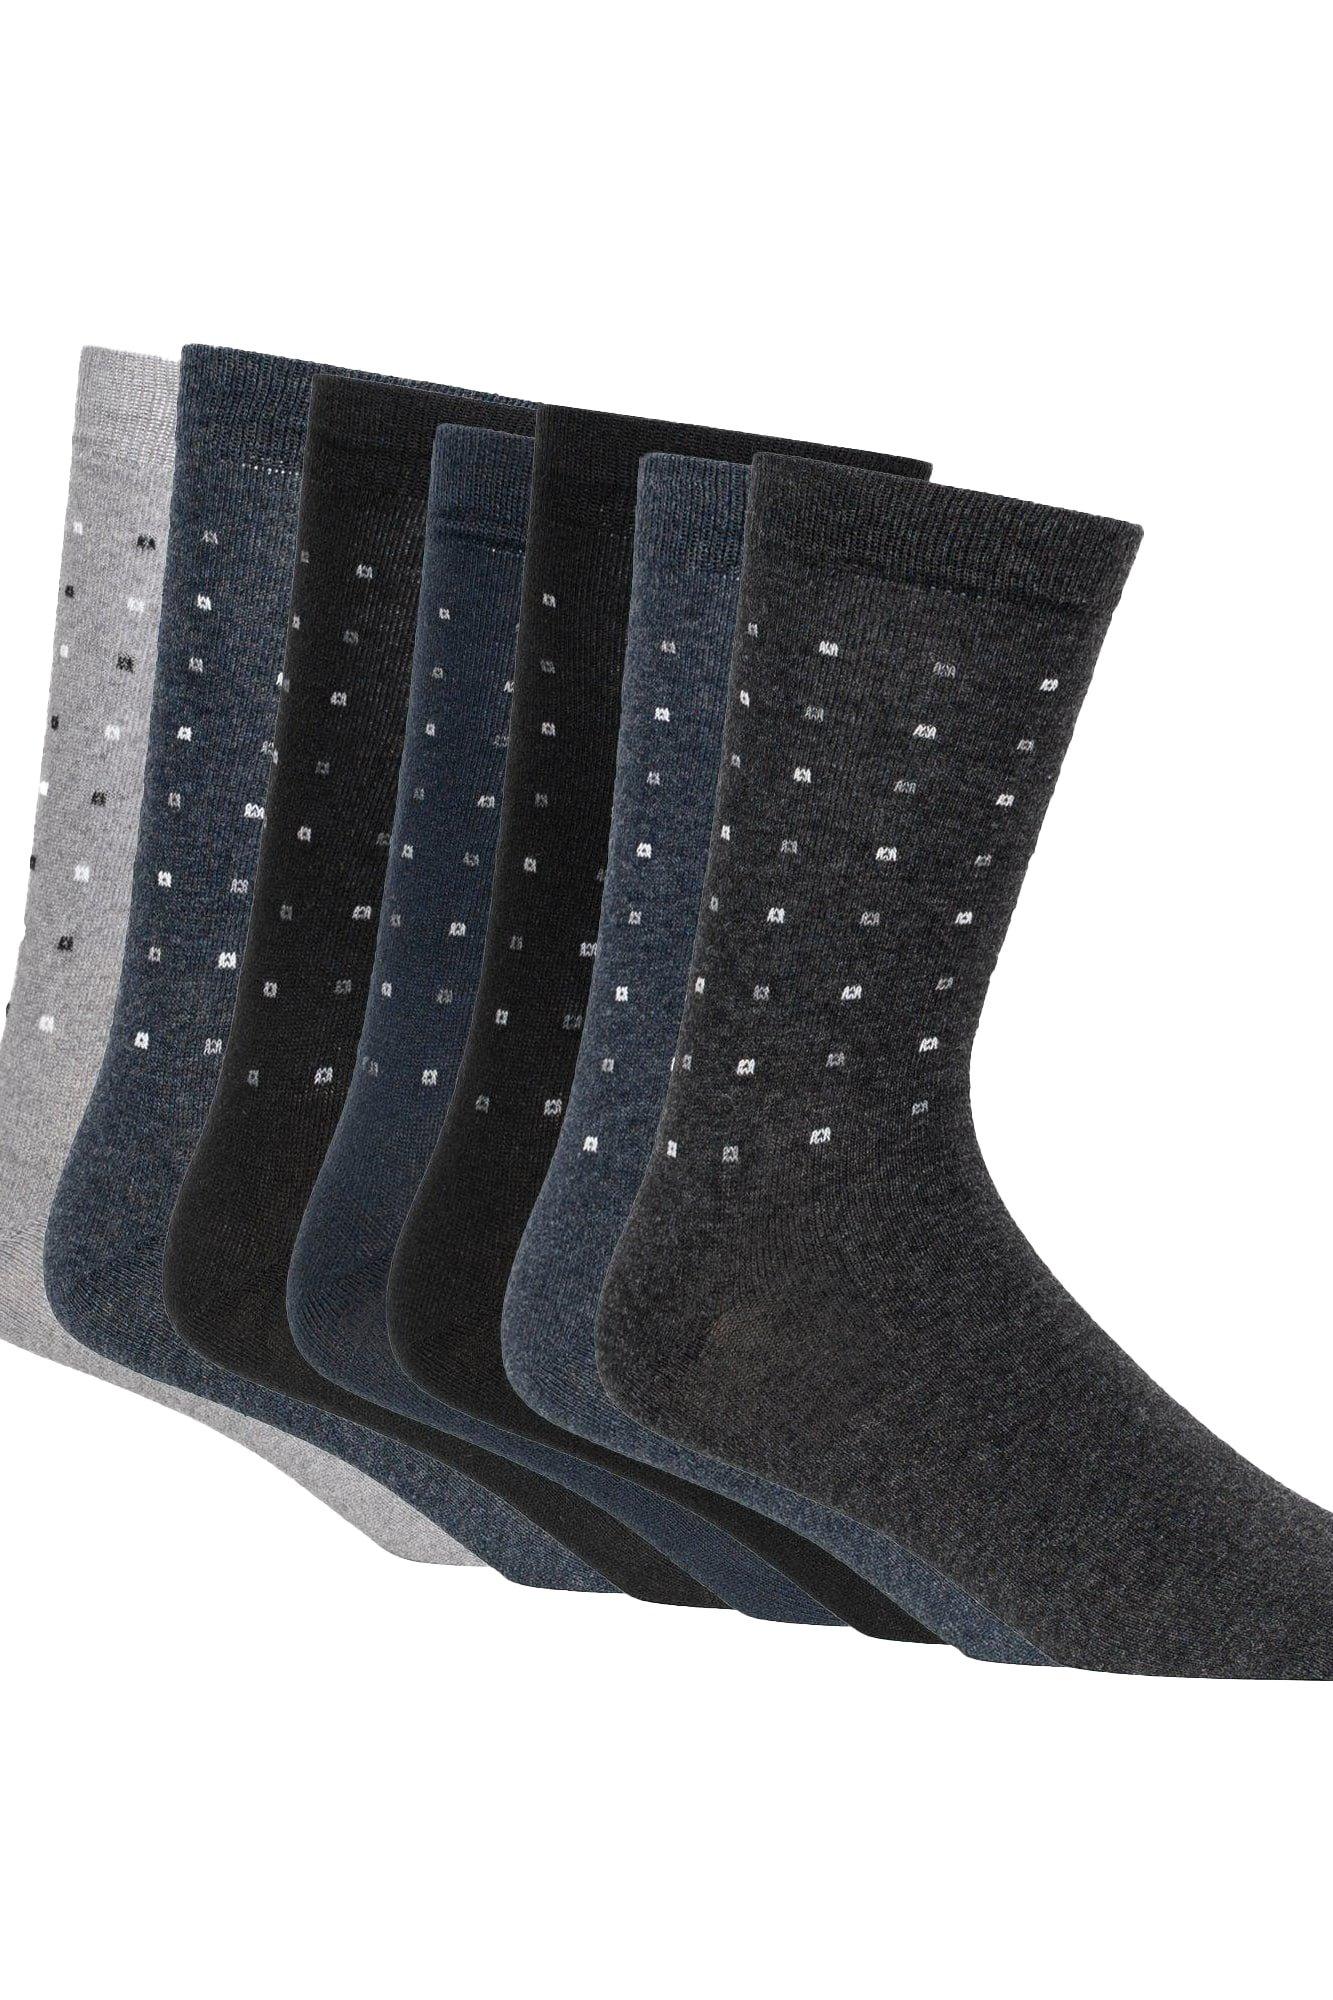 Ashman Sustainable Socks (Pack of 7)